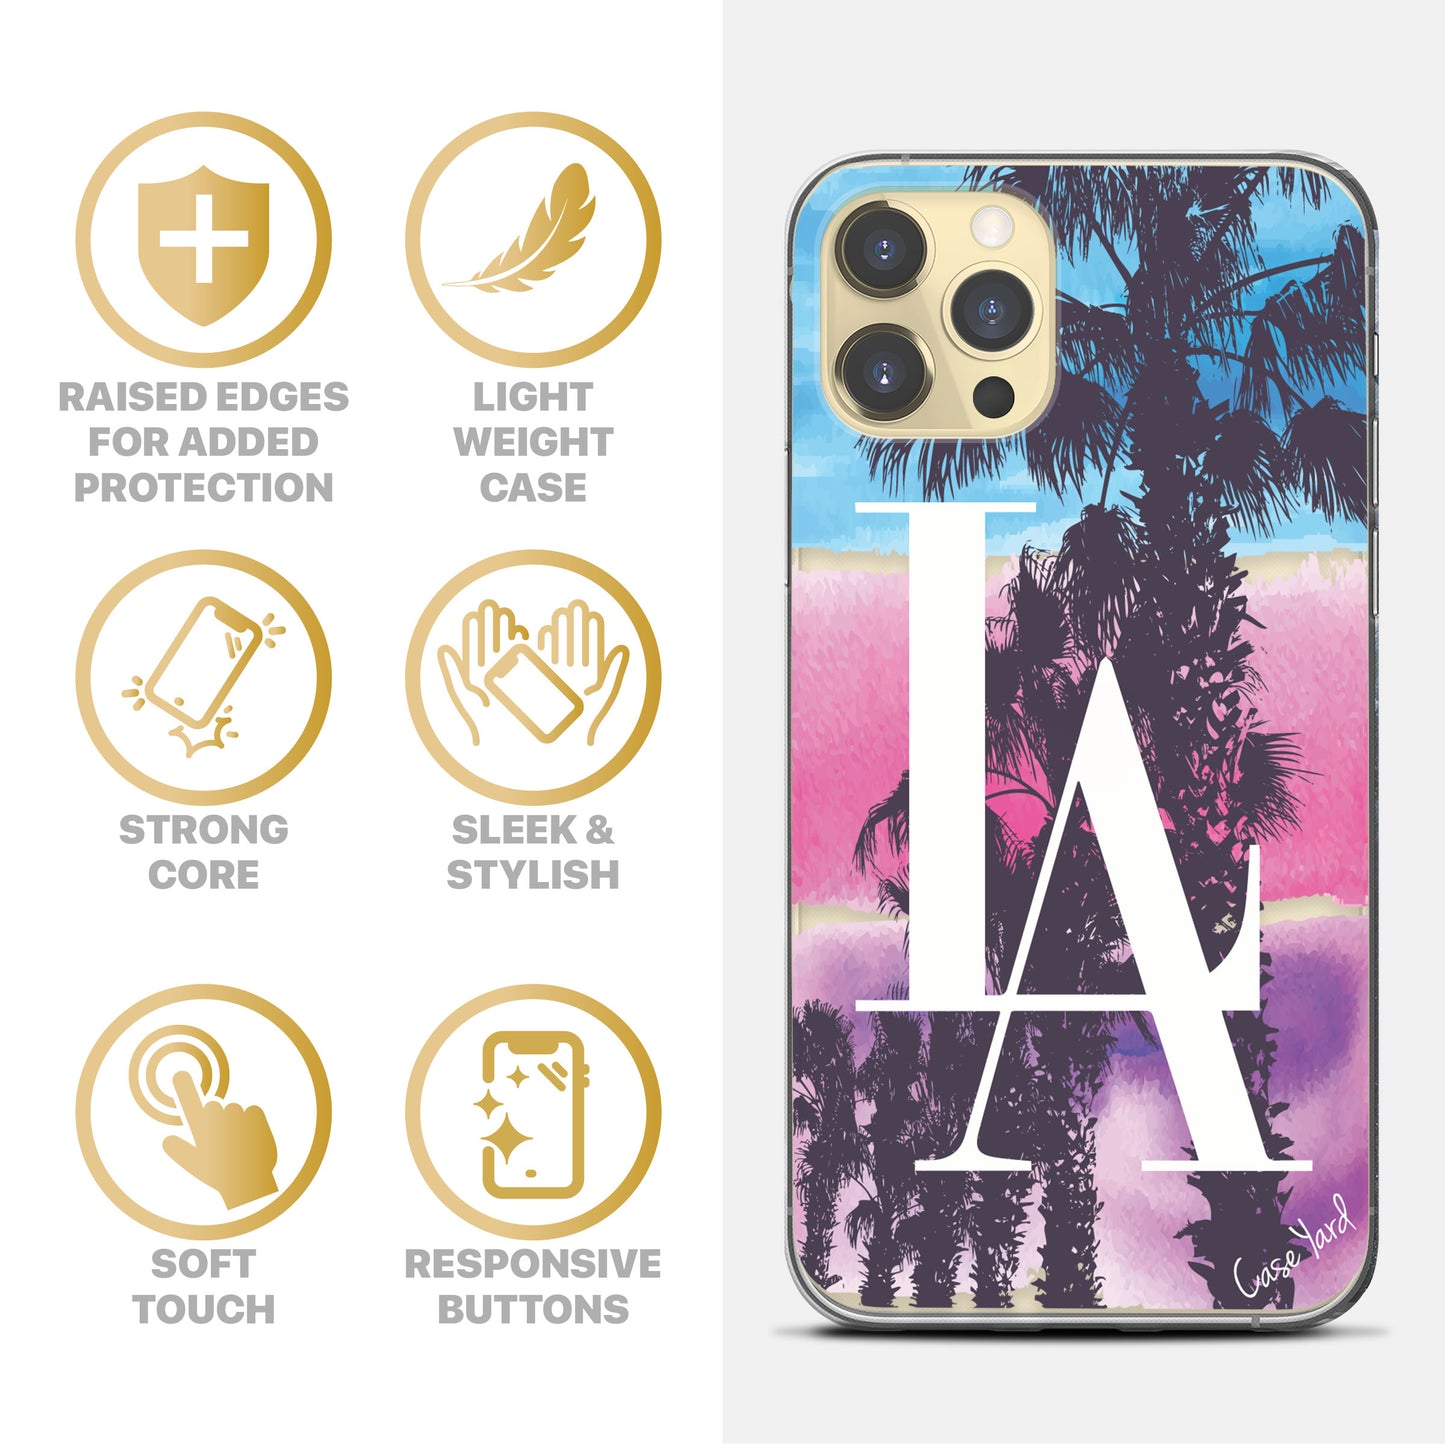 TPU Clear case with (LA) Design for iPhone & Samsung Phones